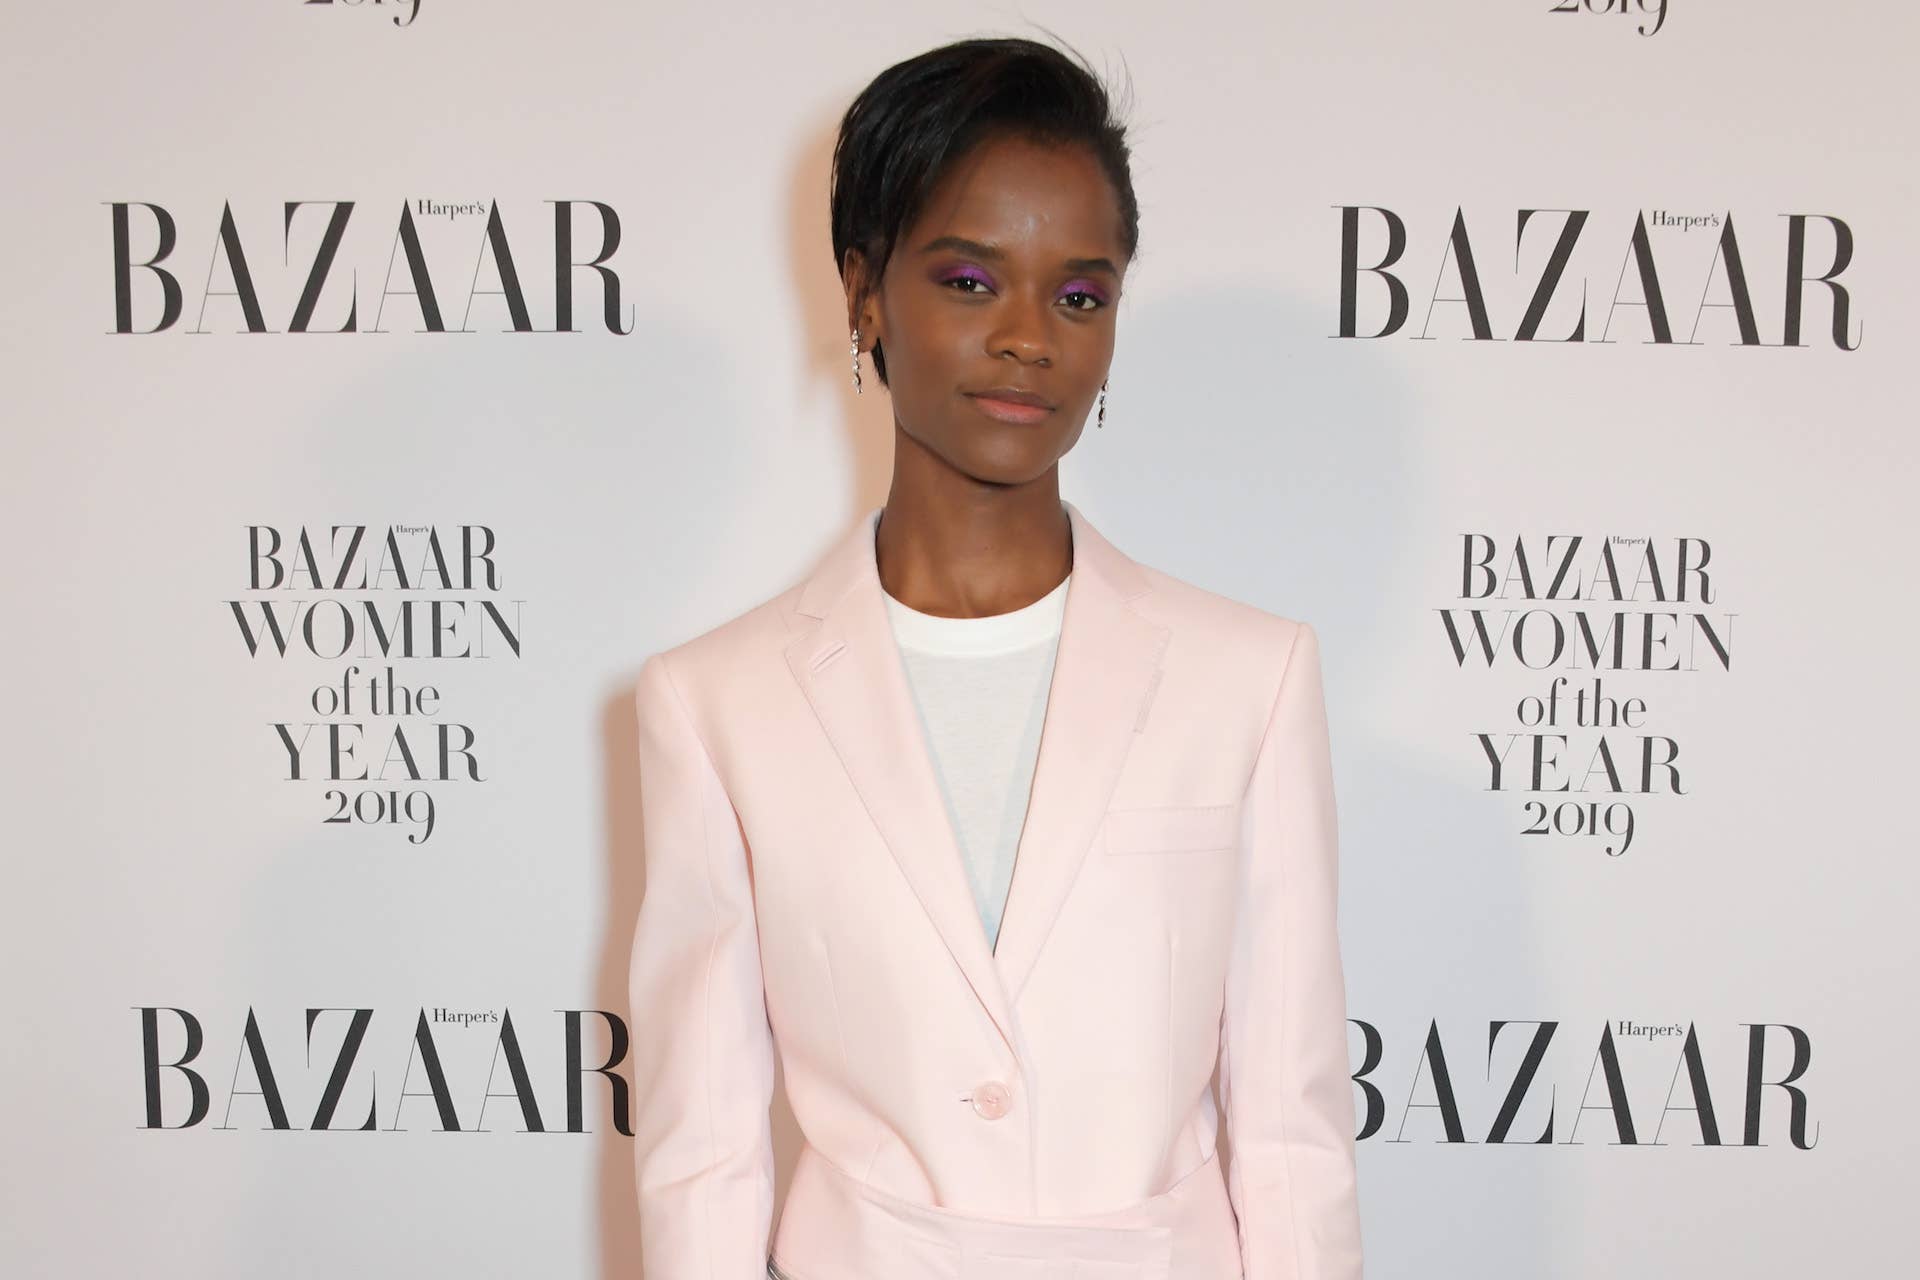 Letitia Wright attends the Harper's Bazaar Women of the Year Awards 2019.